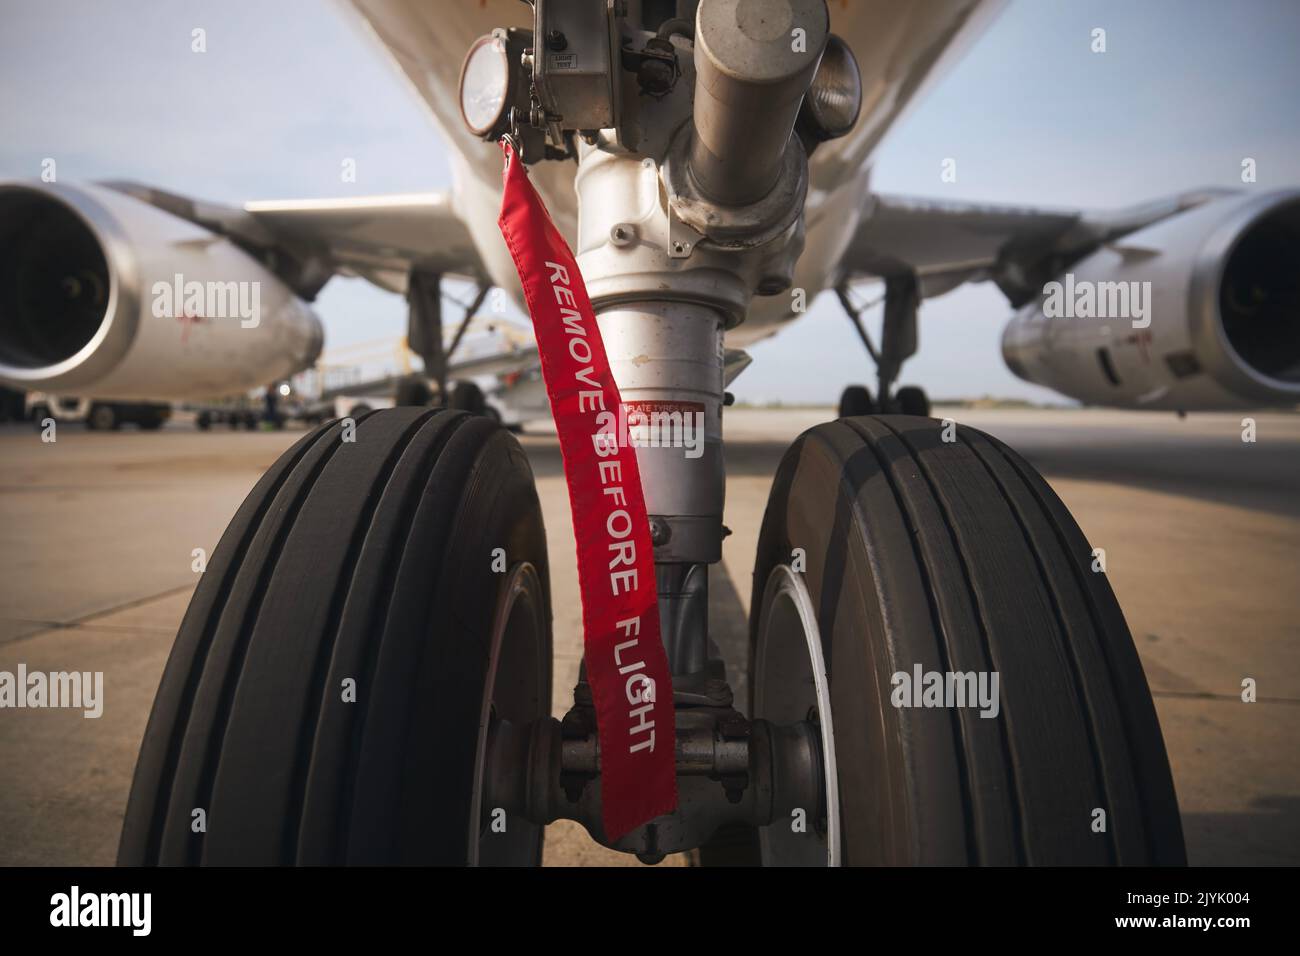 Aircraft nose wheel with red flag Remove Before Flight. Selective focus on airplane at airport. Stock Photo